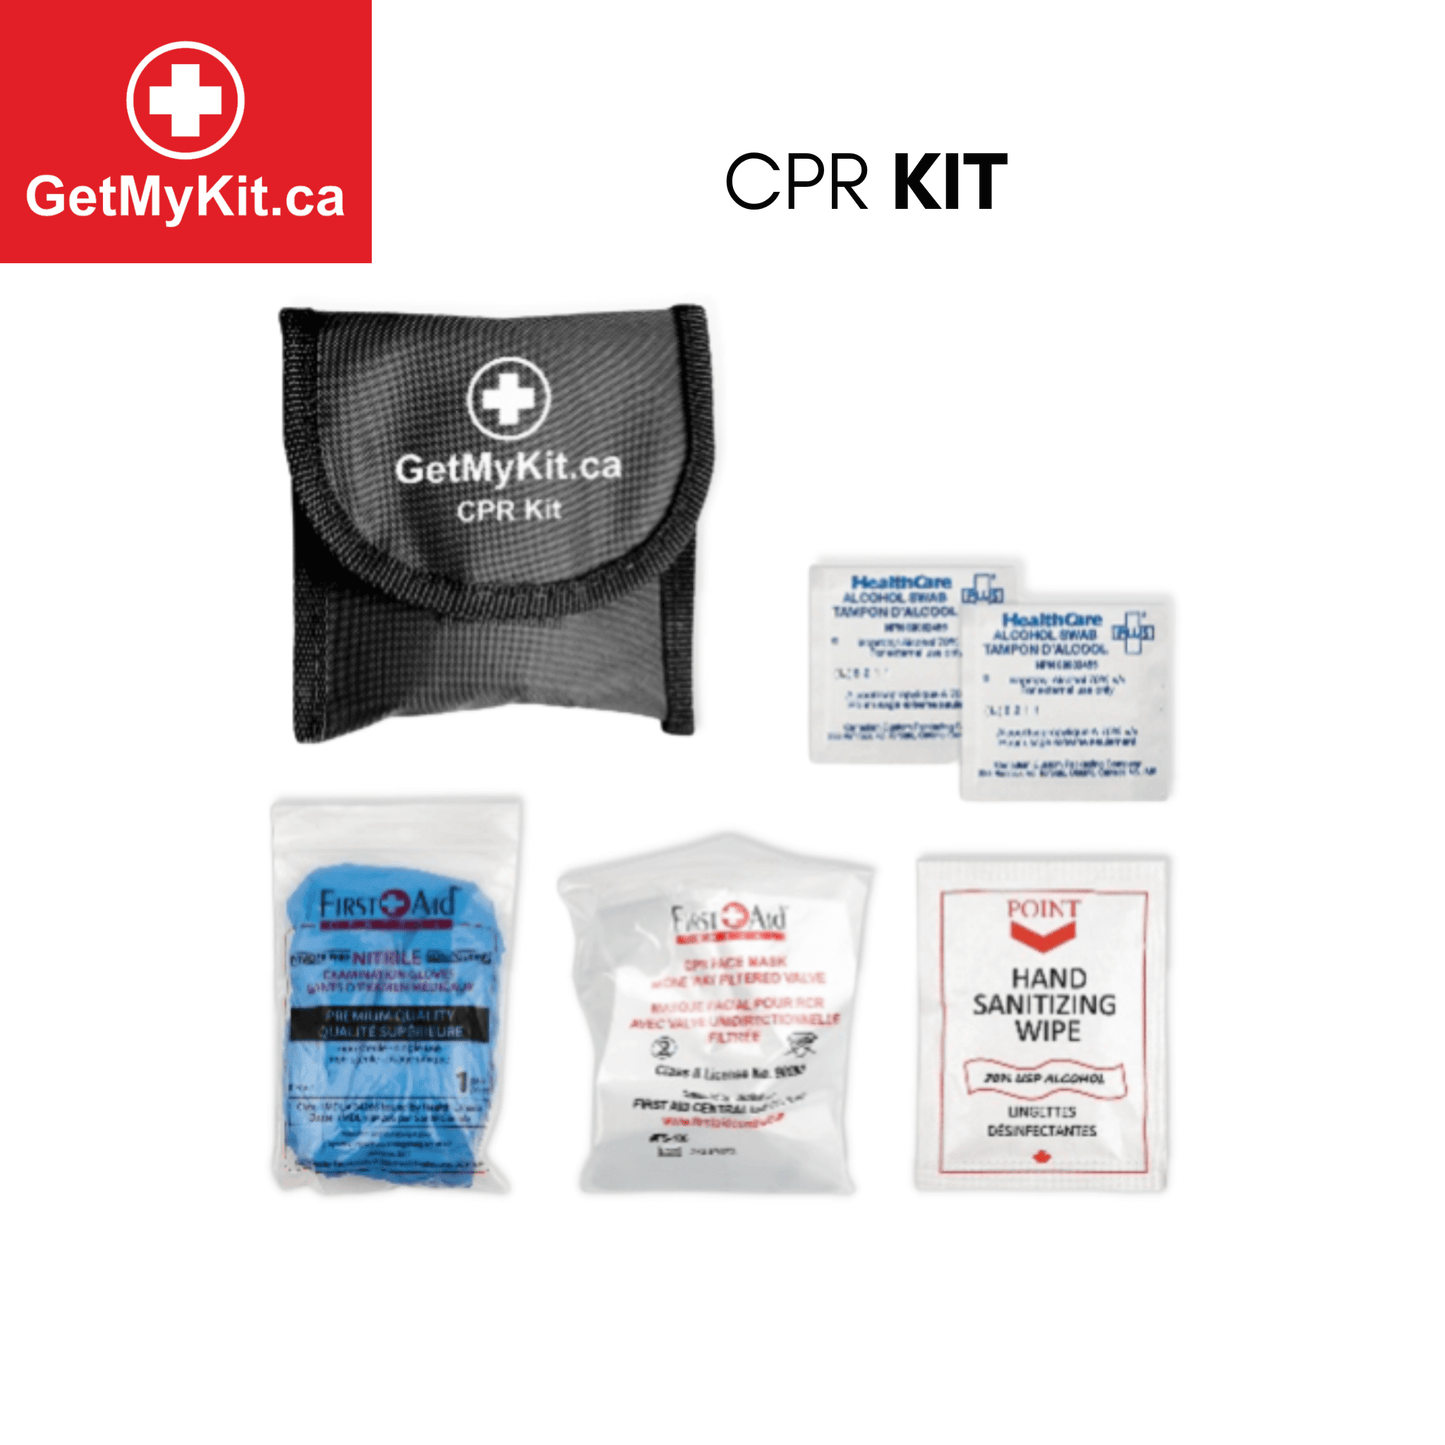 CPR Kit in small pouch